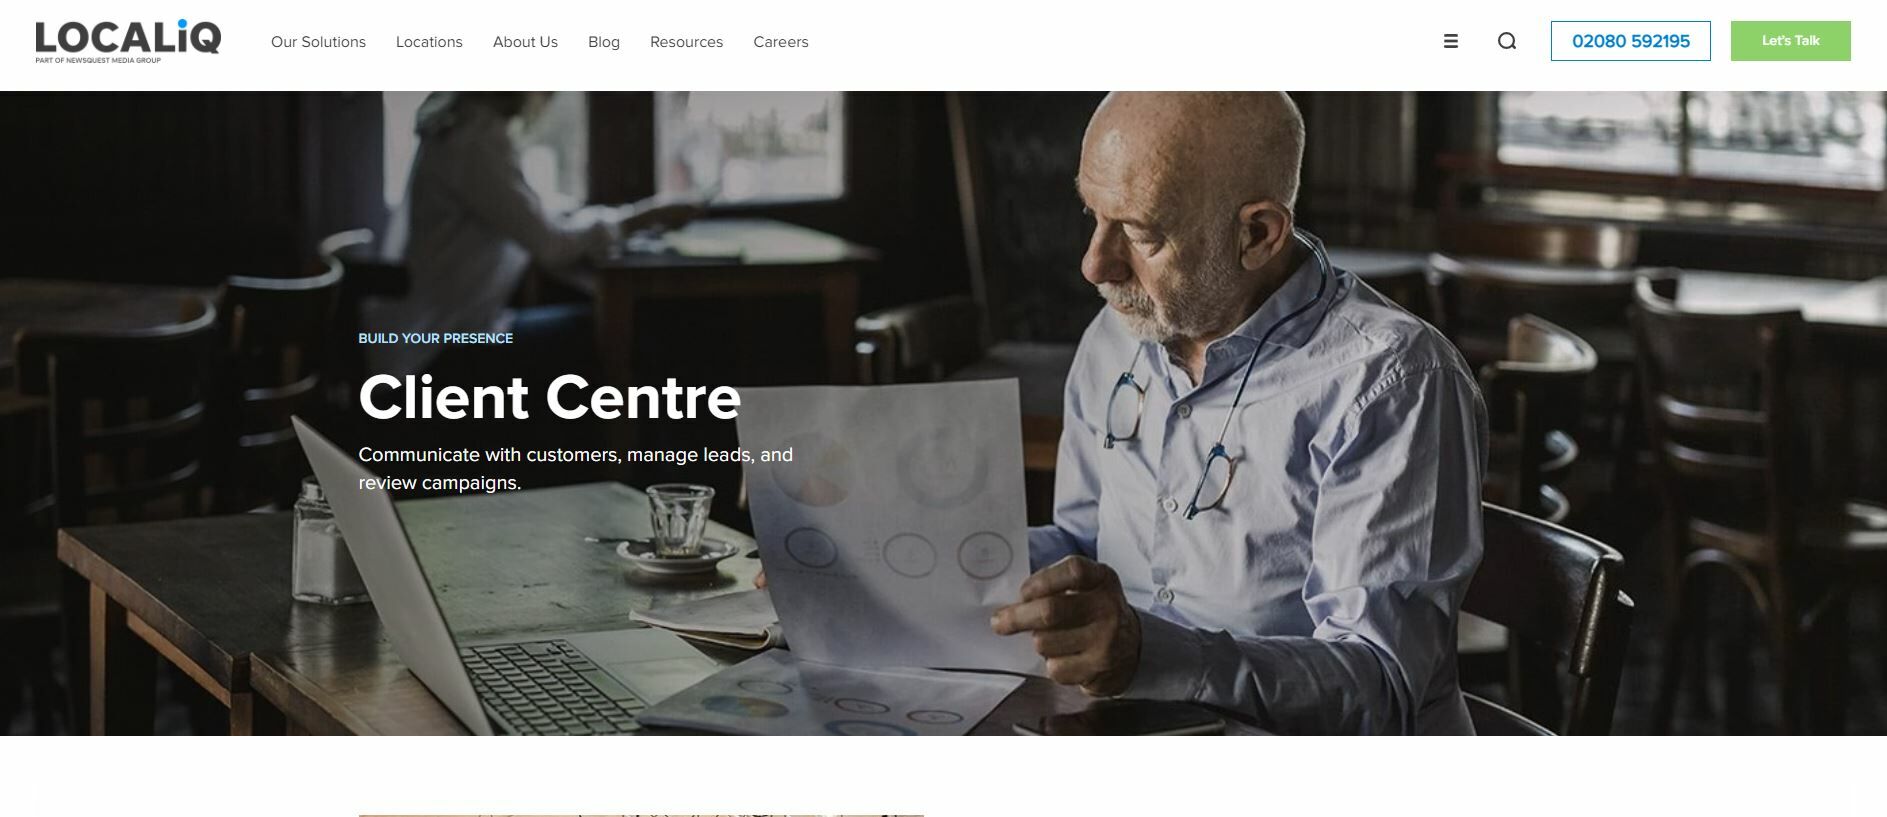 Apps and Tools for Small Businesses| Client Centre.